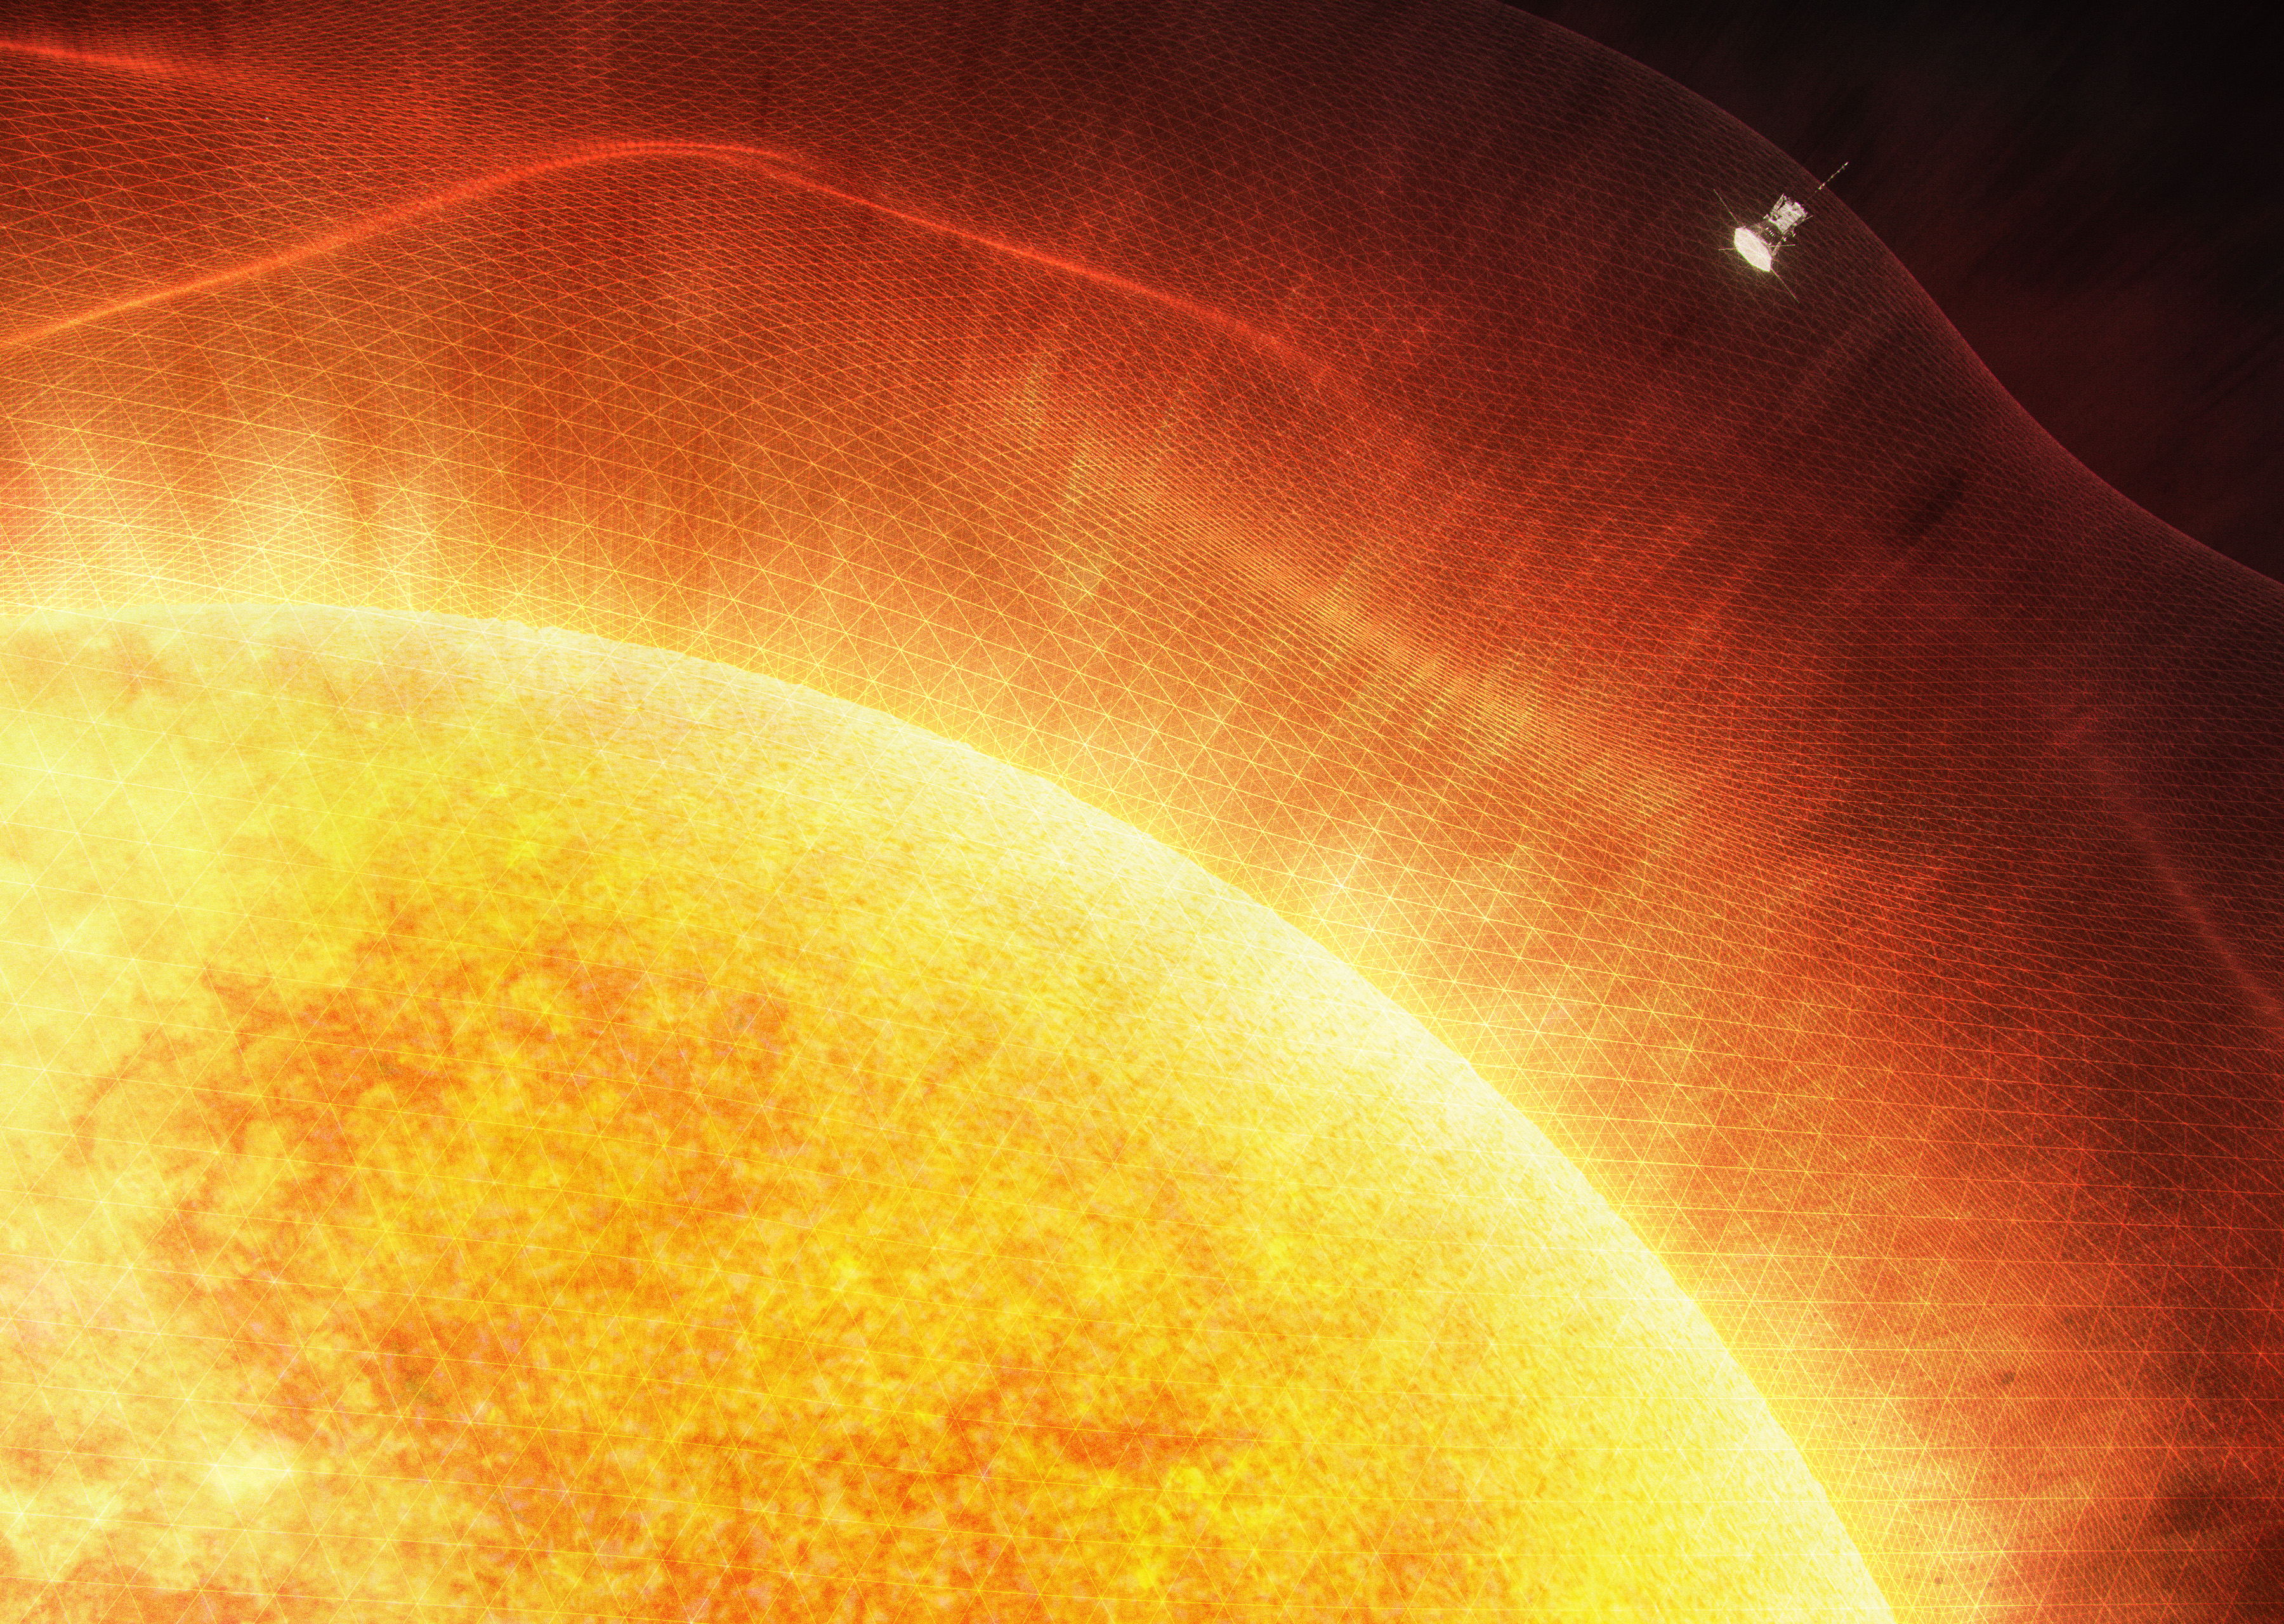 NASA Enters the Solar Atmosphere for the First Time, Bringing New Discoveries - NASA